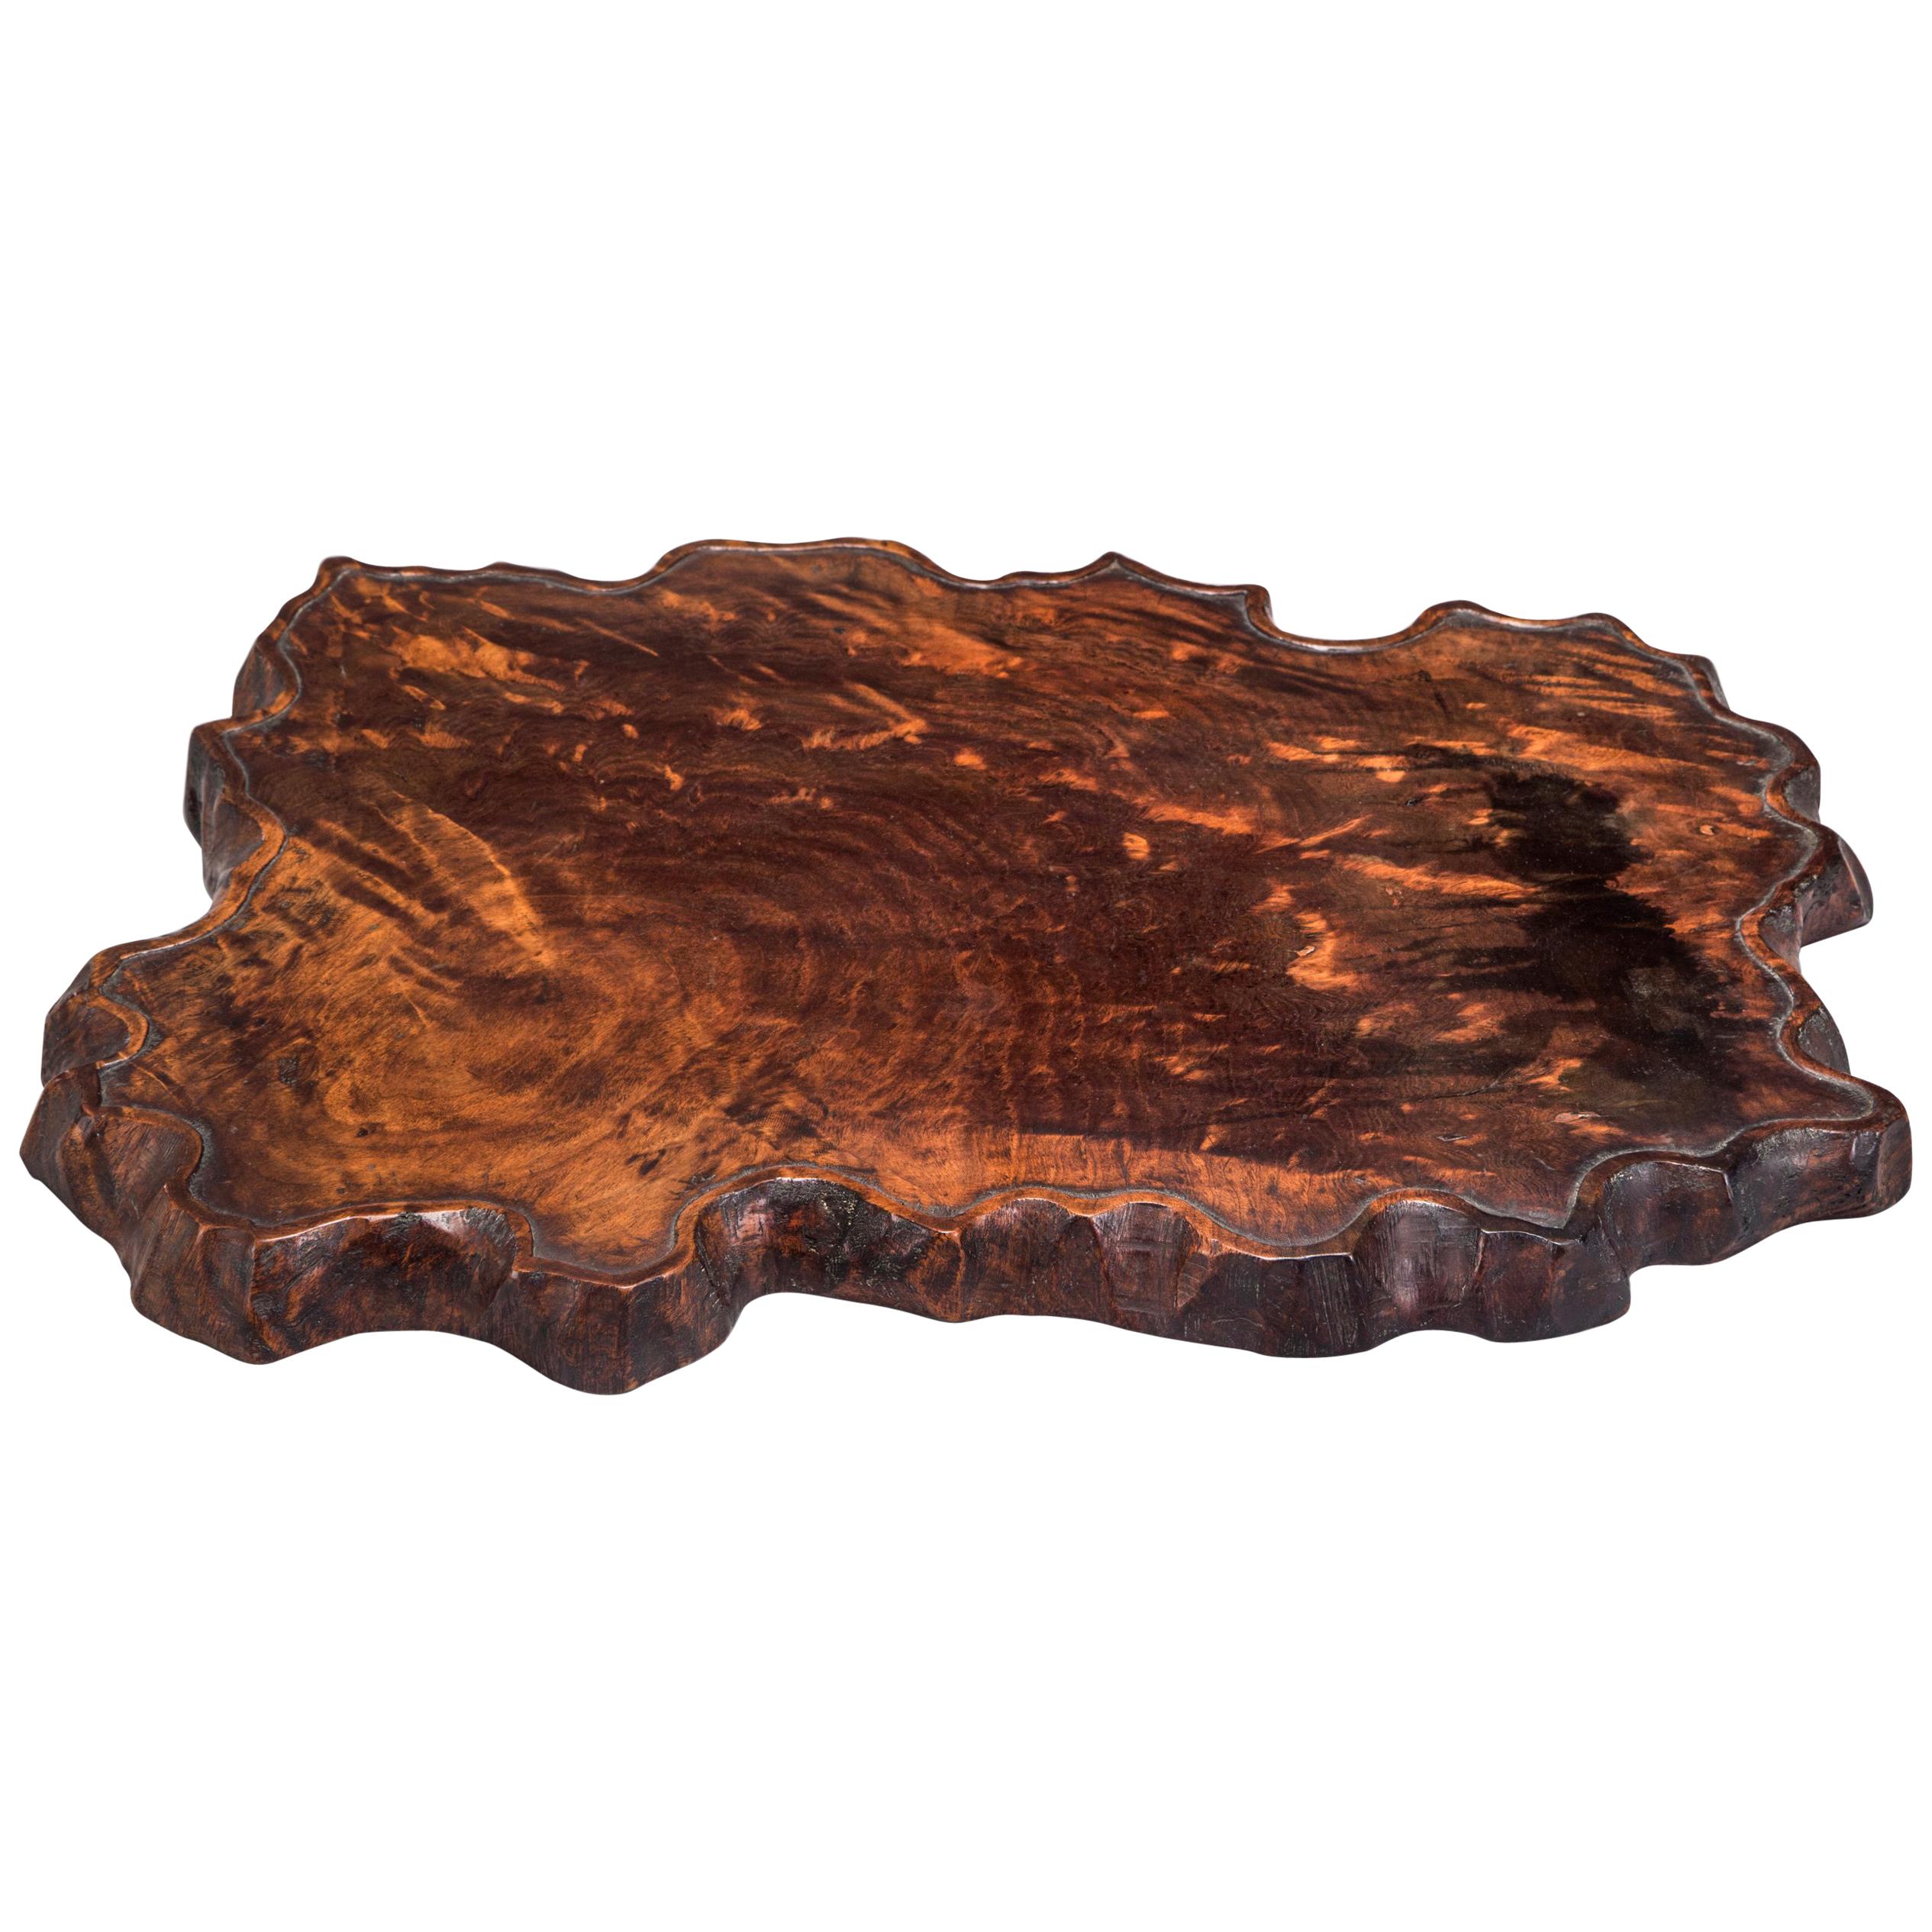 Japanese Burl Wood Tray / Stand